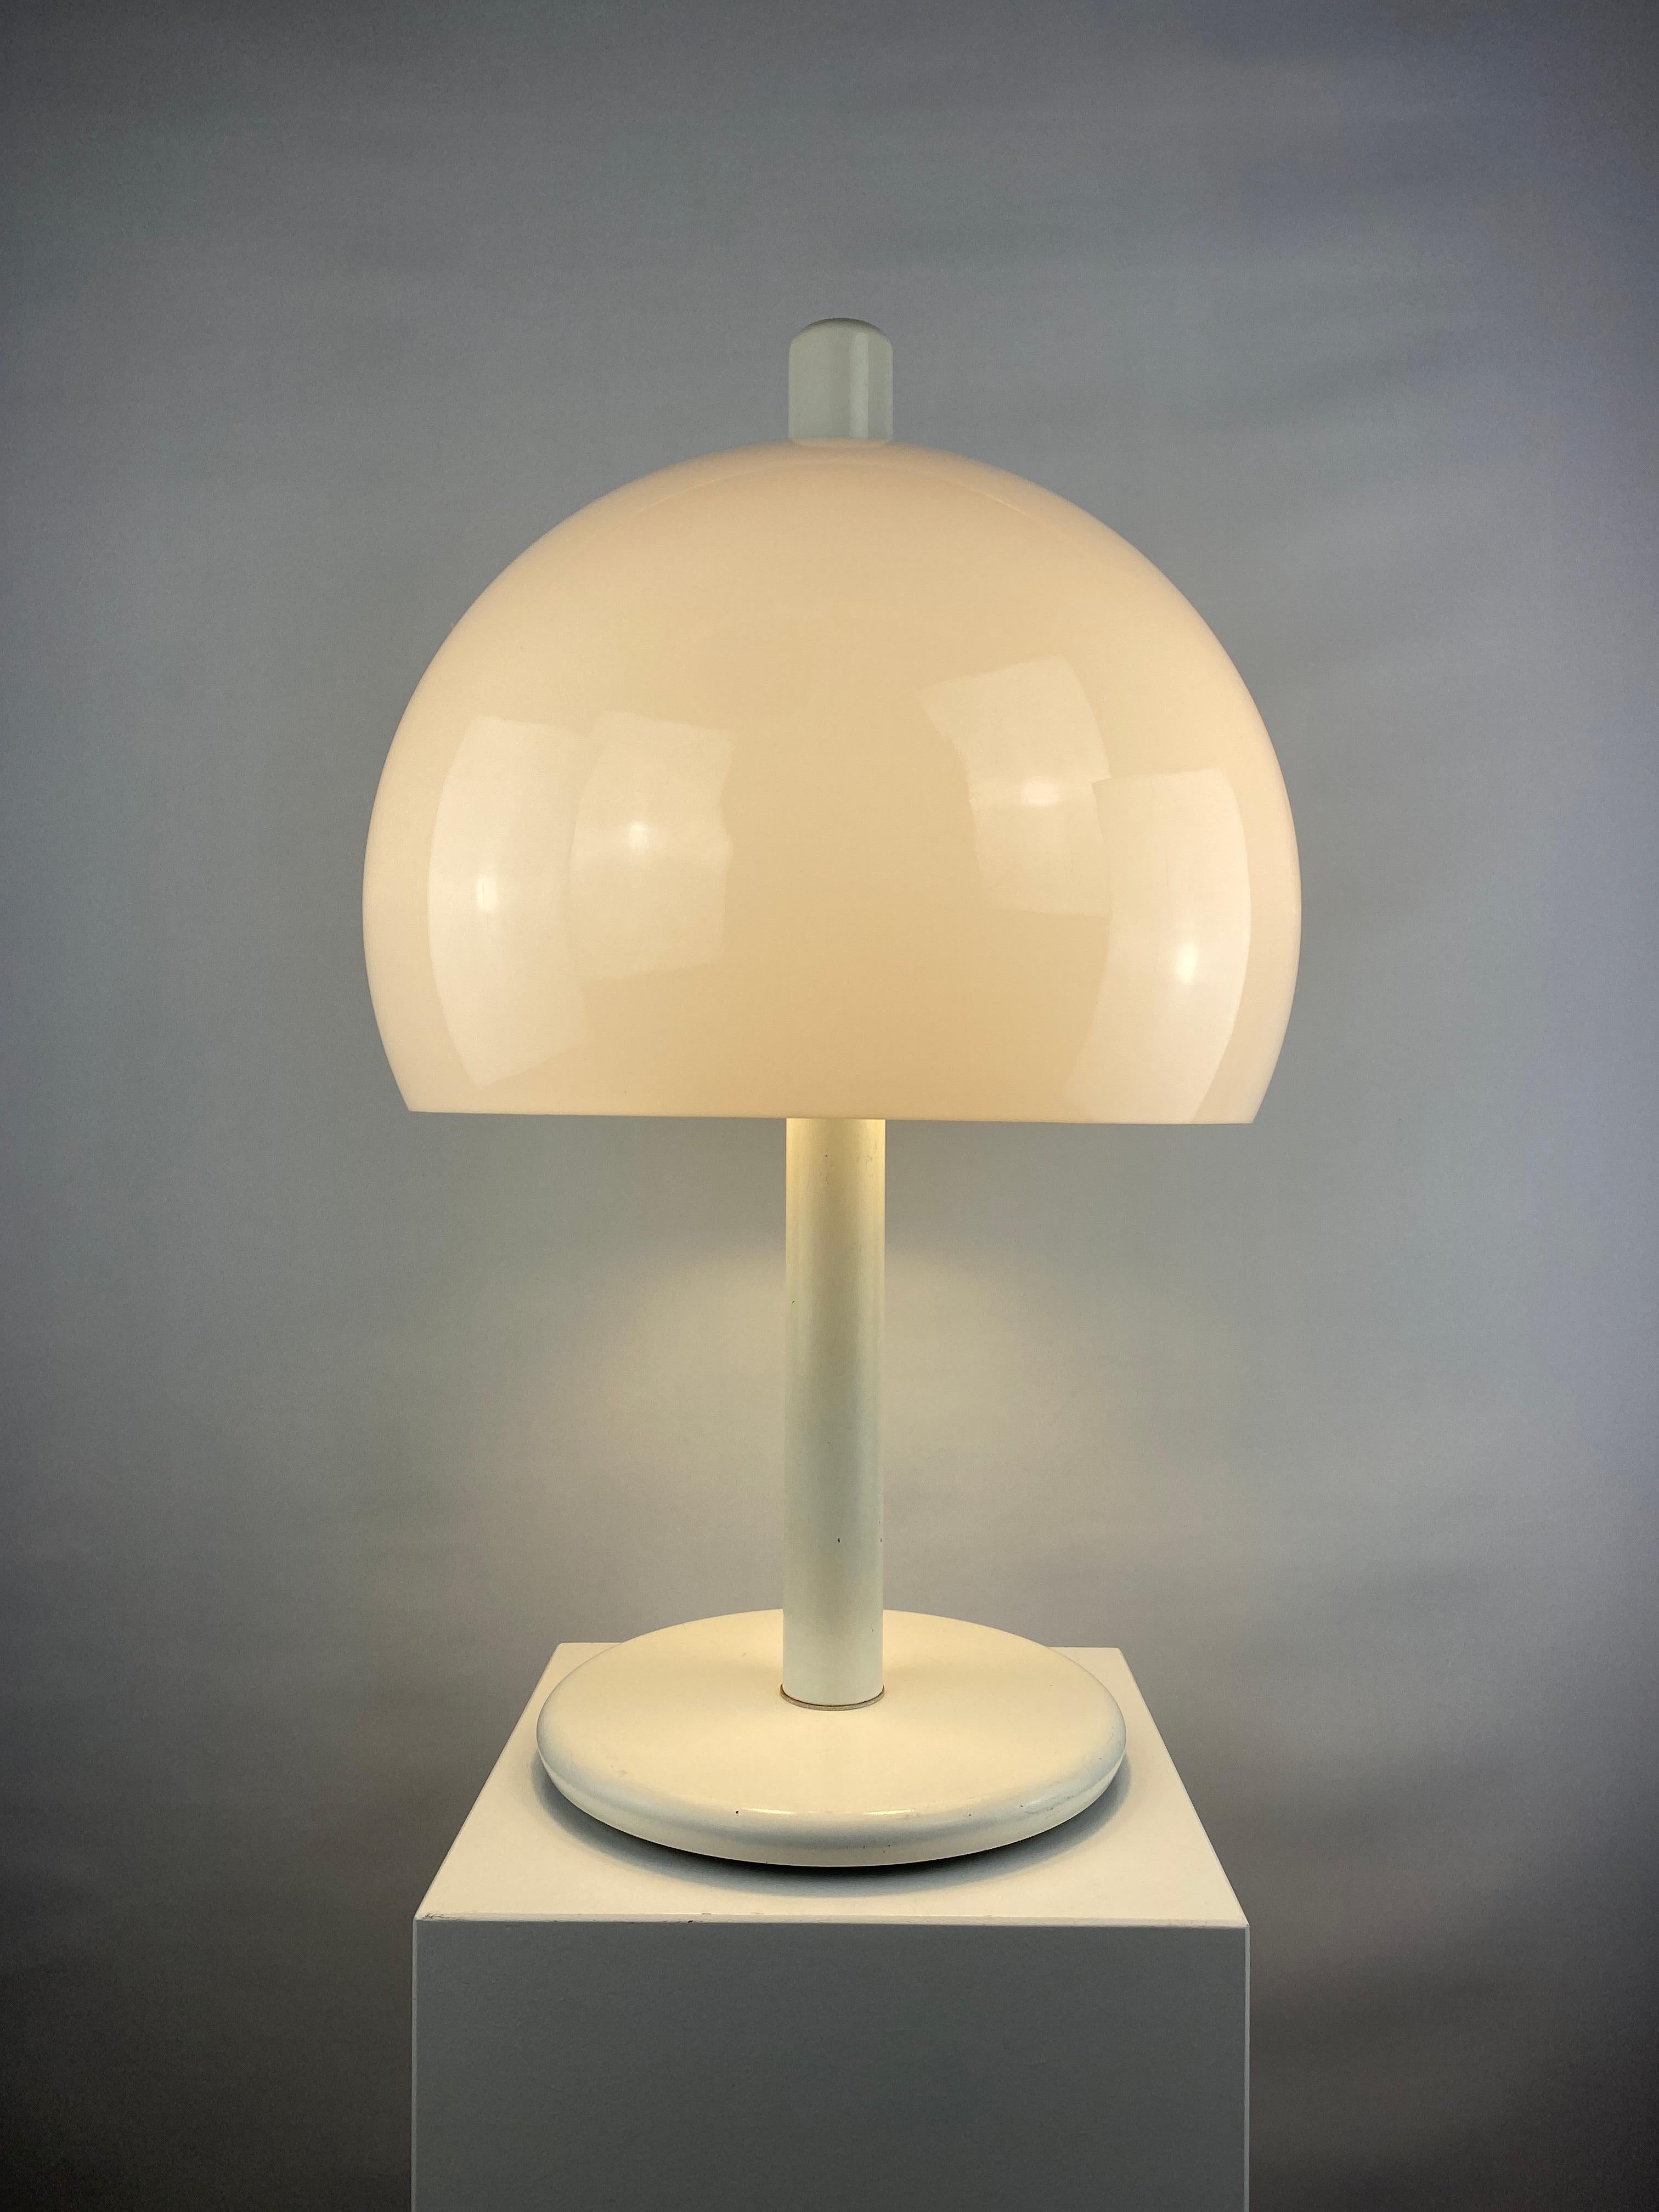 Very funky and very large mid-century mushroom shaped table light with an acrylic white shade and white metal base. This lamp is manufactured in The Netherlands and is from the 1970's.

Could be made by Dijkstra, Anvia or Herda but I cannot tell for